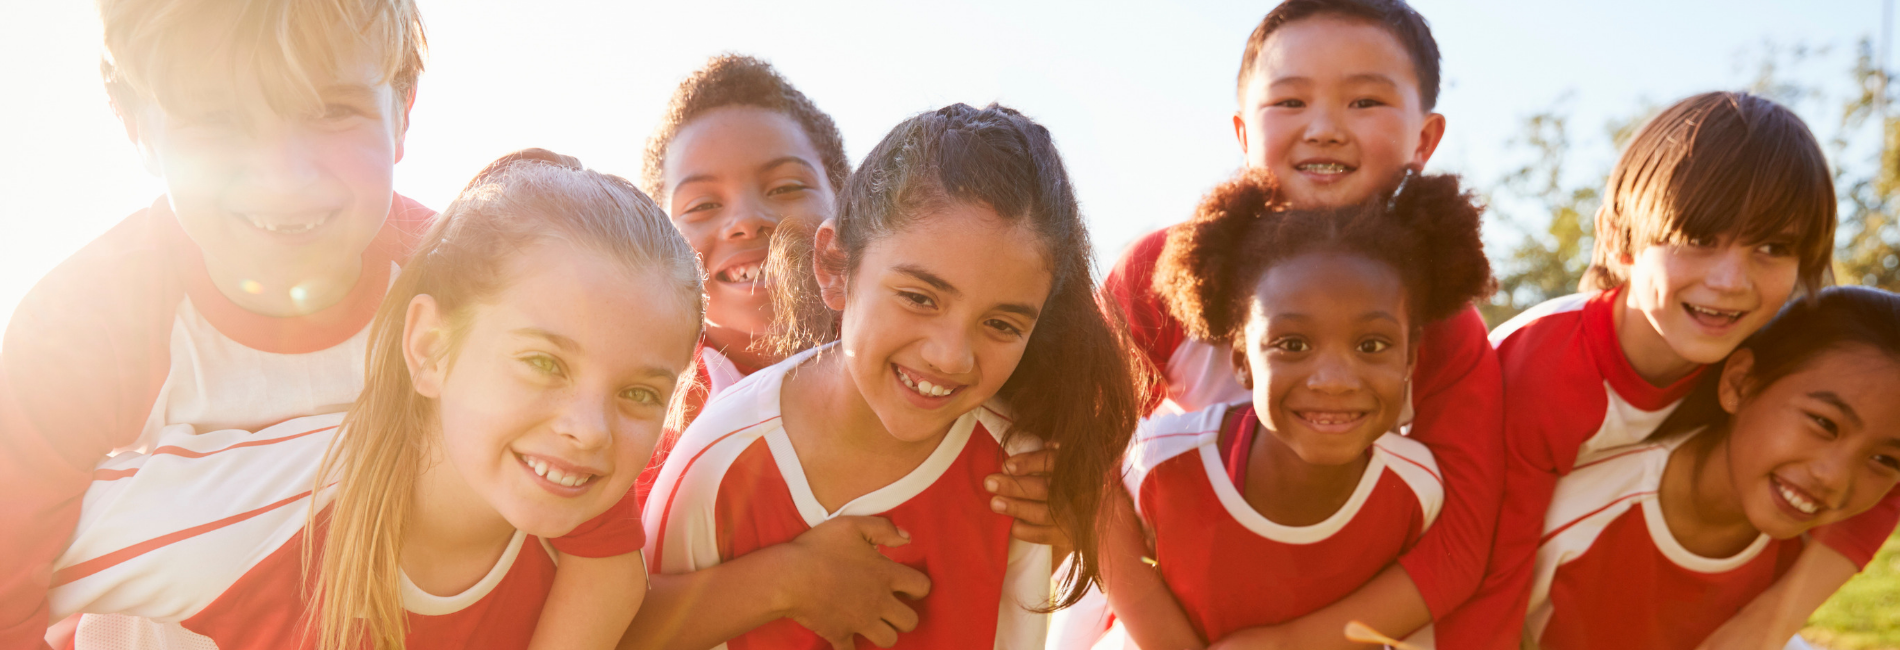 Benefits of Playing Sports for Kids